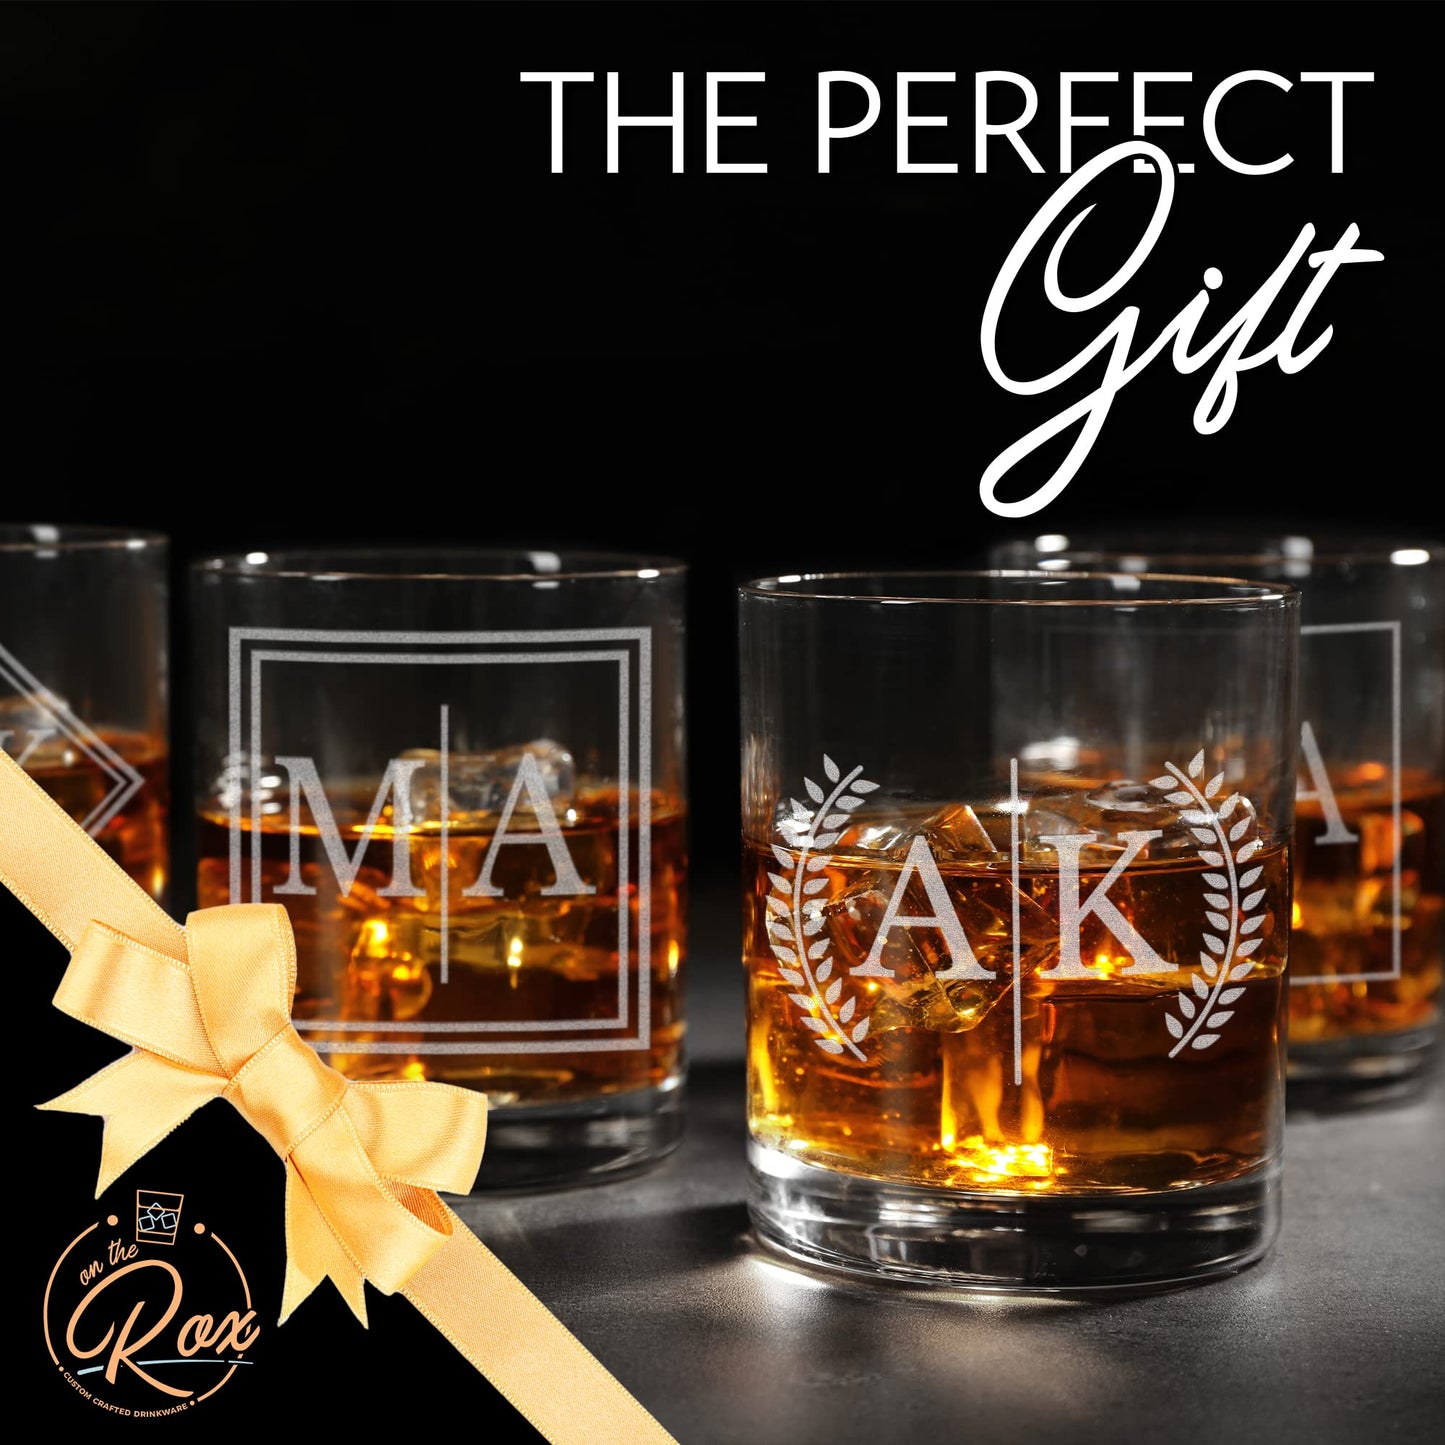 On The Rox Drinks Personalized Whiskey Gifts for Men - 11 oz Engraved Split Monogrammed Whiskey Glass Set of 4 - Customized Cocktail Glass - Bourbon, Scotch, Rocks, Brandy